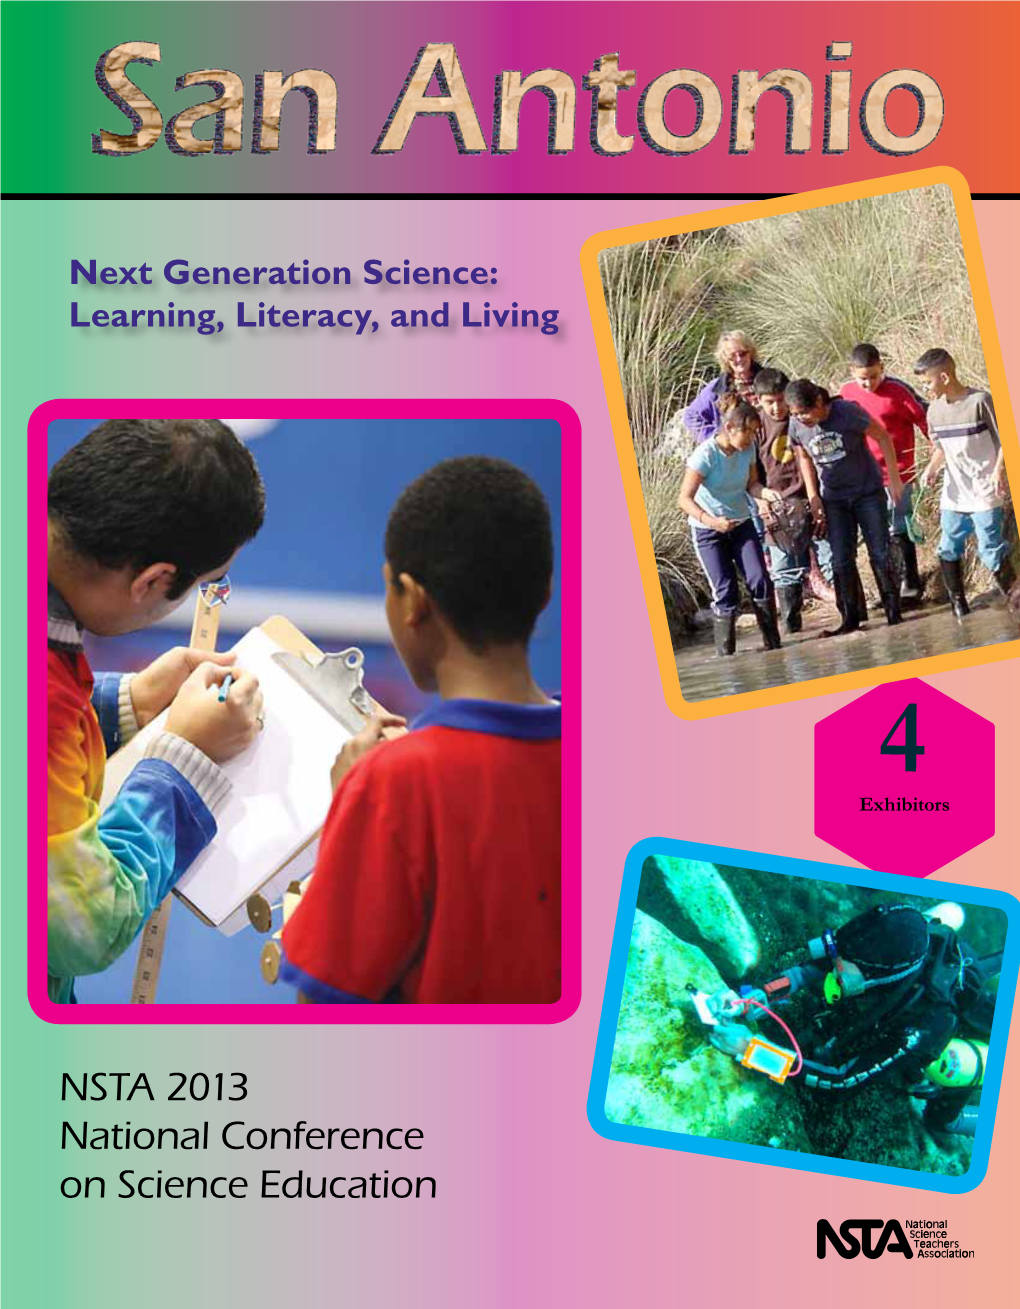 NSTA 2013 National Conference on Science Education Wherever Your Students Learn Science, They Can Use TI-Nspire™ Technology